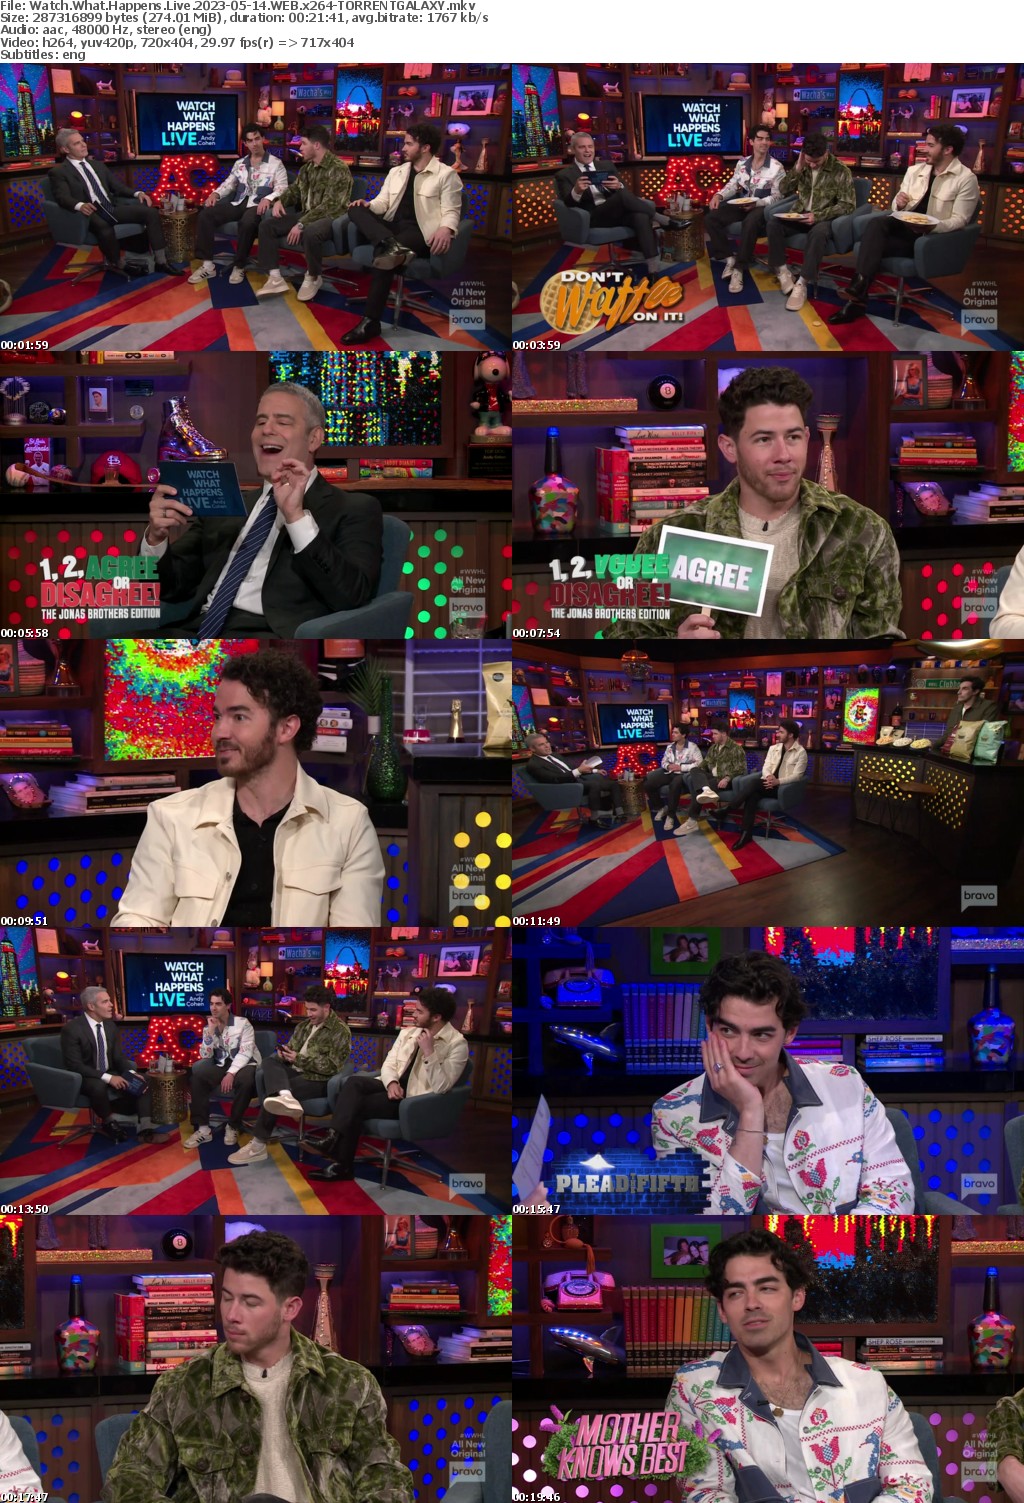 Watch What Happens Live 2023-05-14 WEB x264-GALAXY